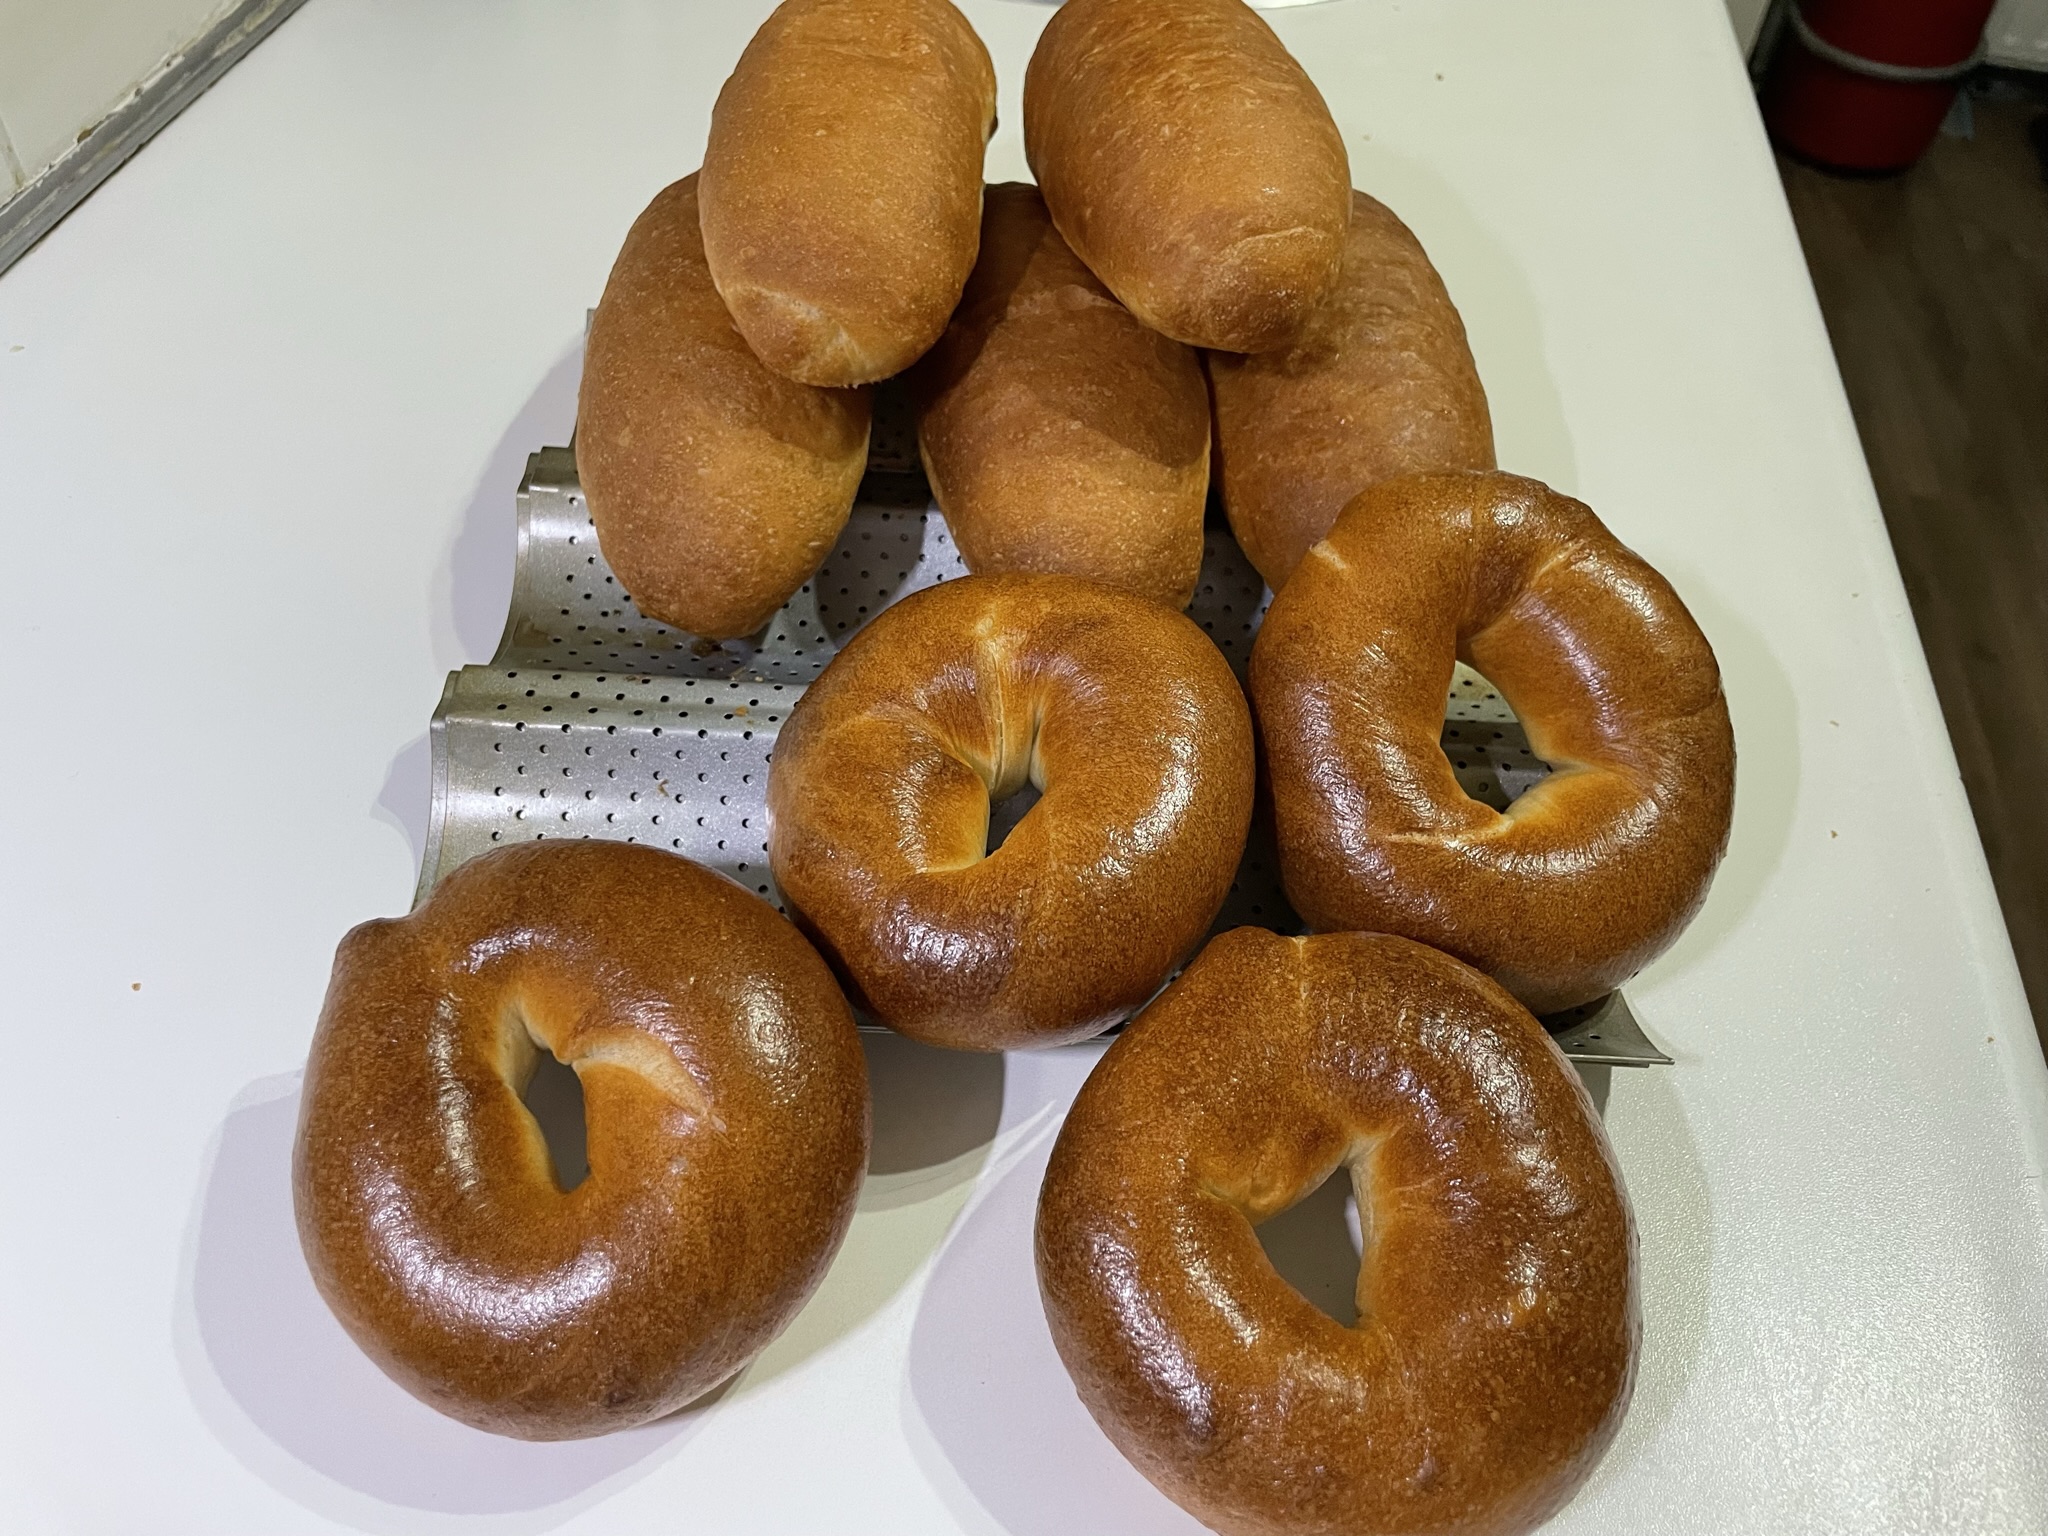 Japanese bagels just came out of the oven